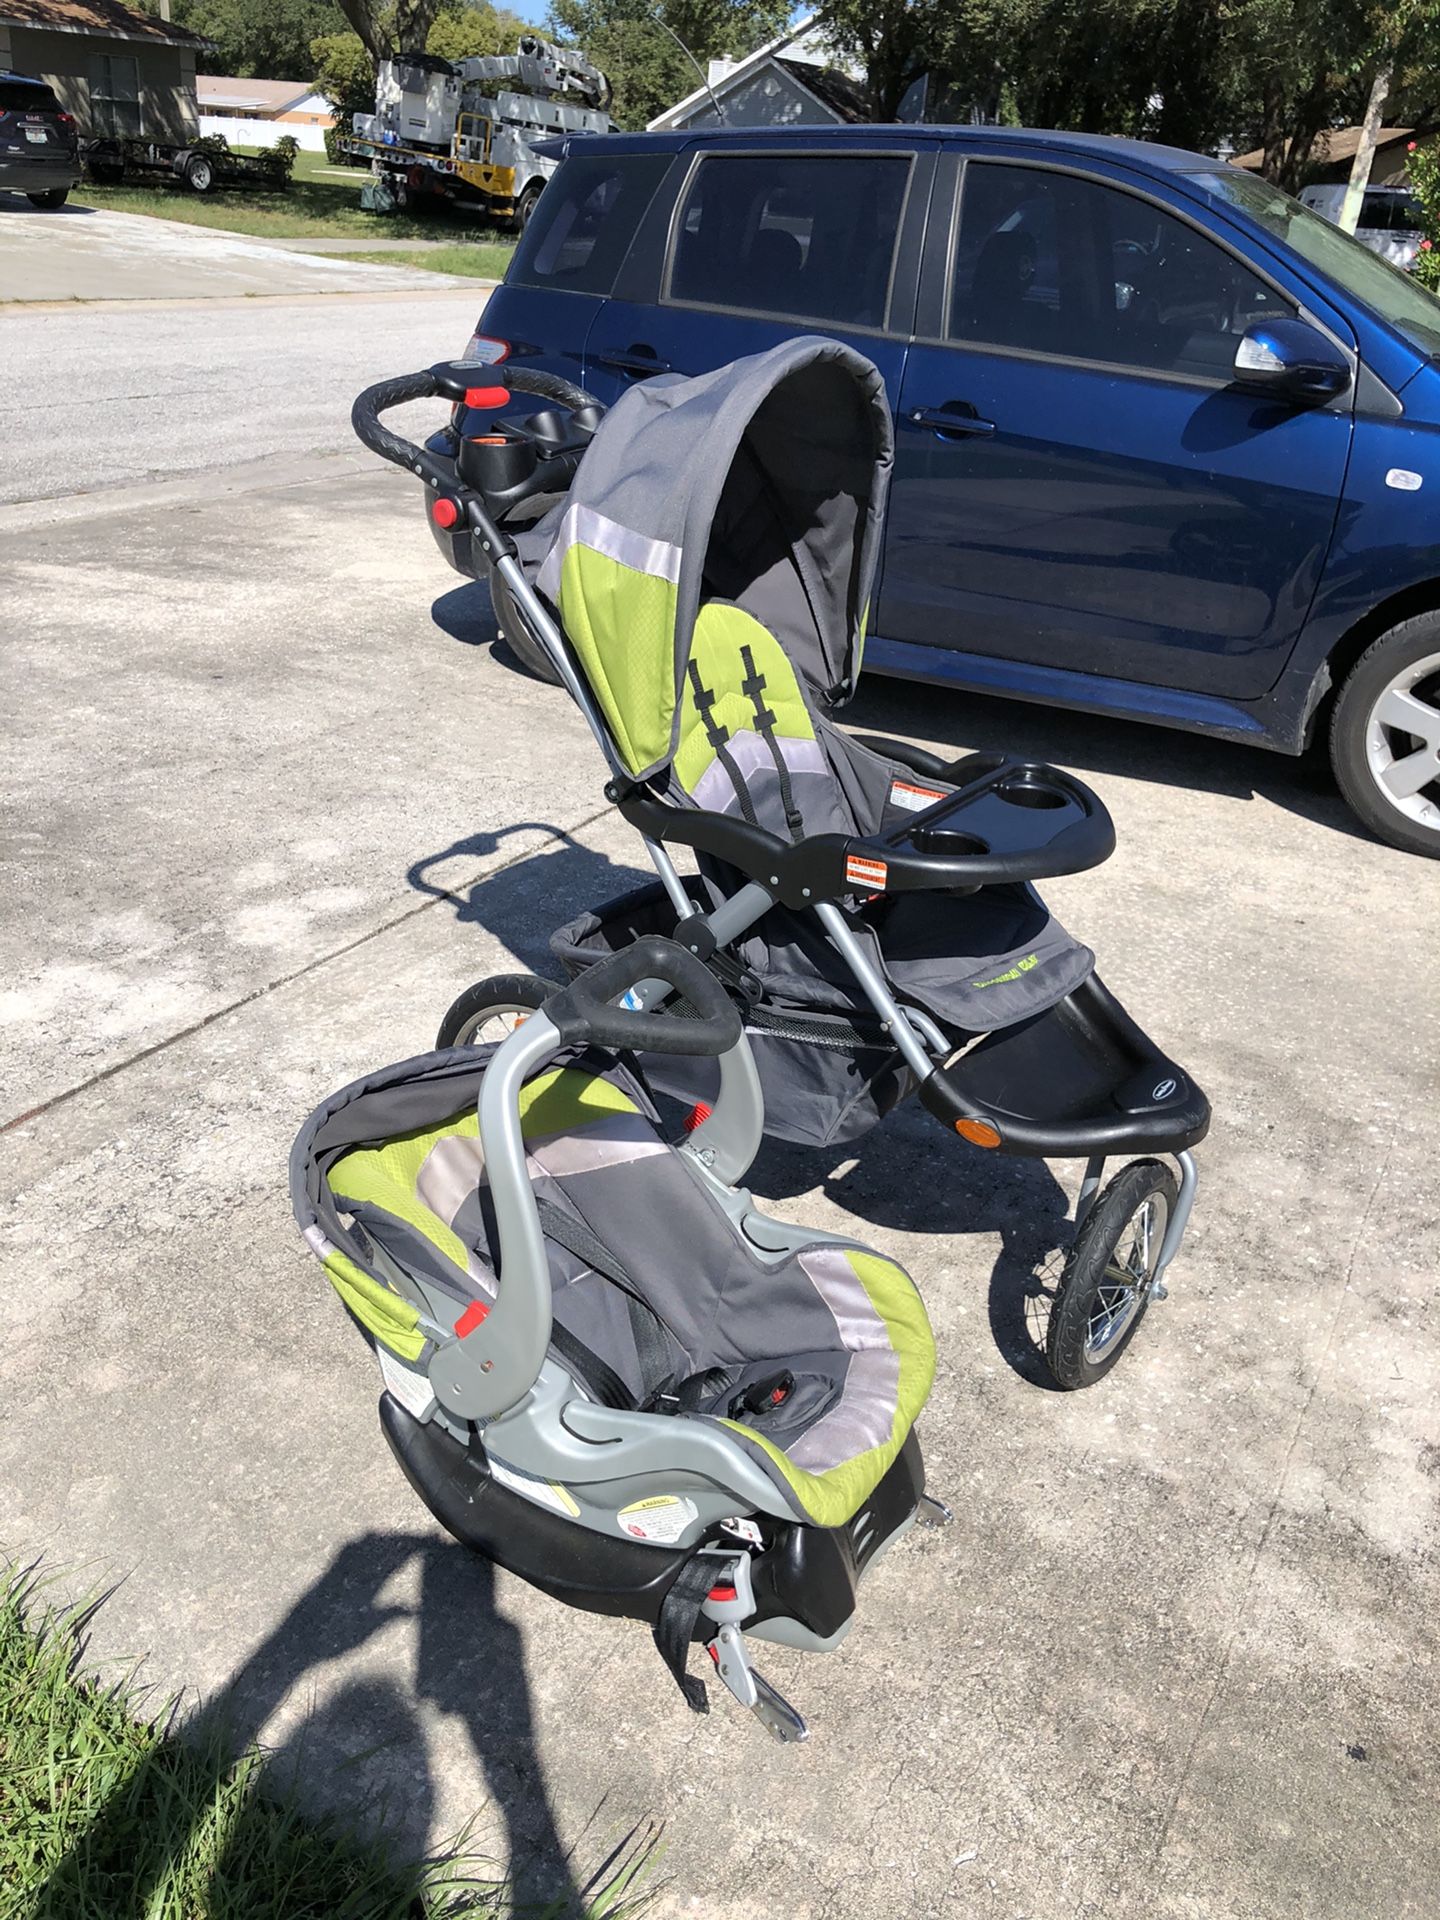 BabyTrend Jogging Stroller (Expedition ELX edition with speakers)